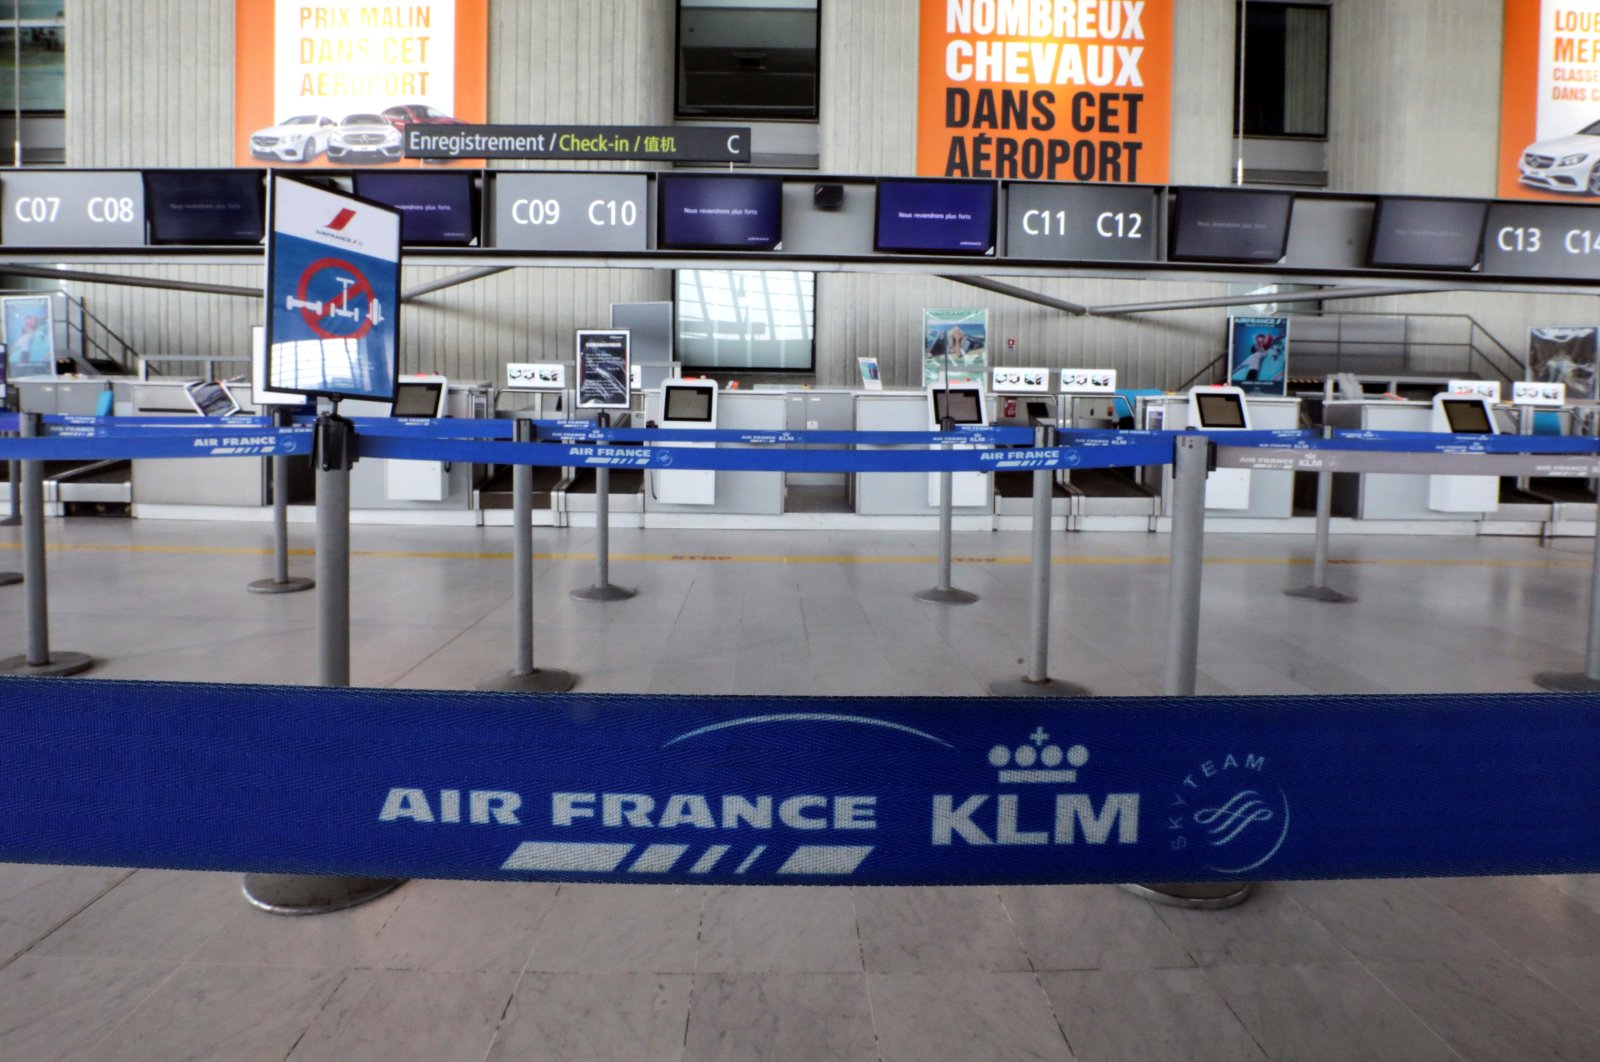 A view shows a deserted Air France check-in desk at Nice international airport, as a lockdown is imposed to slow the rate of the coronavirus disease (COVID-19), in Nice, France, April 13, 2020. (Reuters Photo)